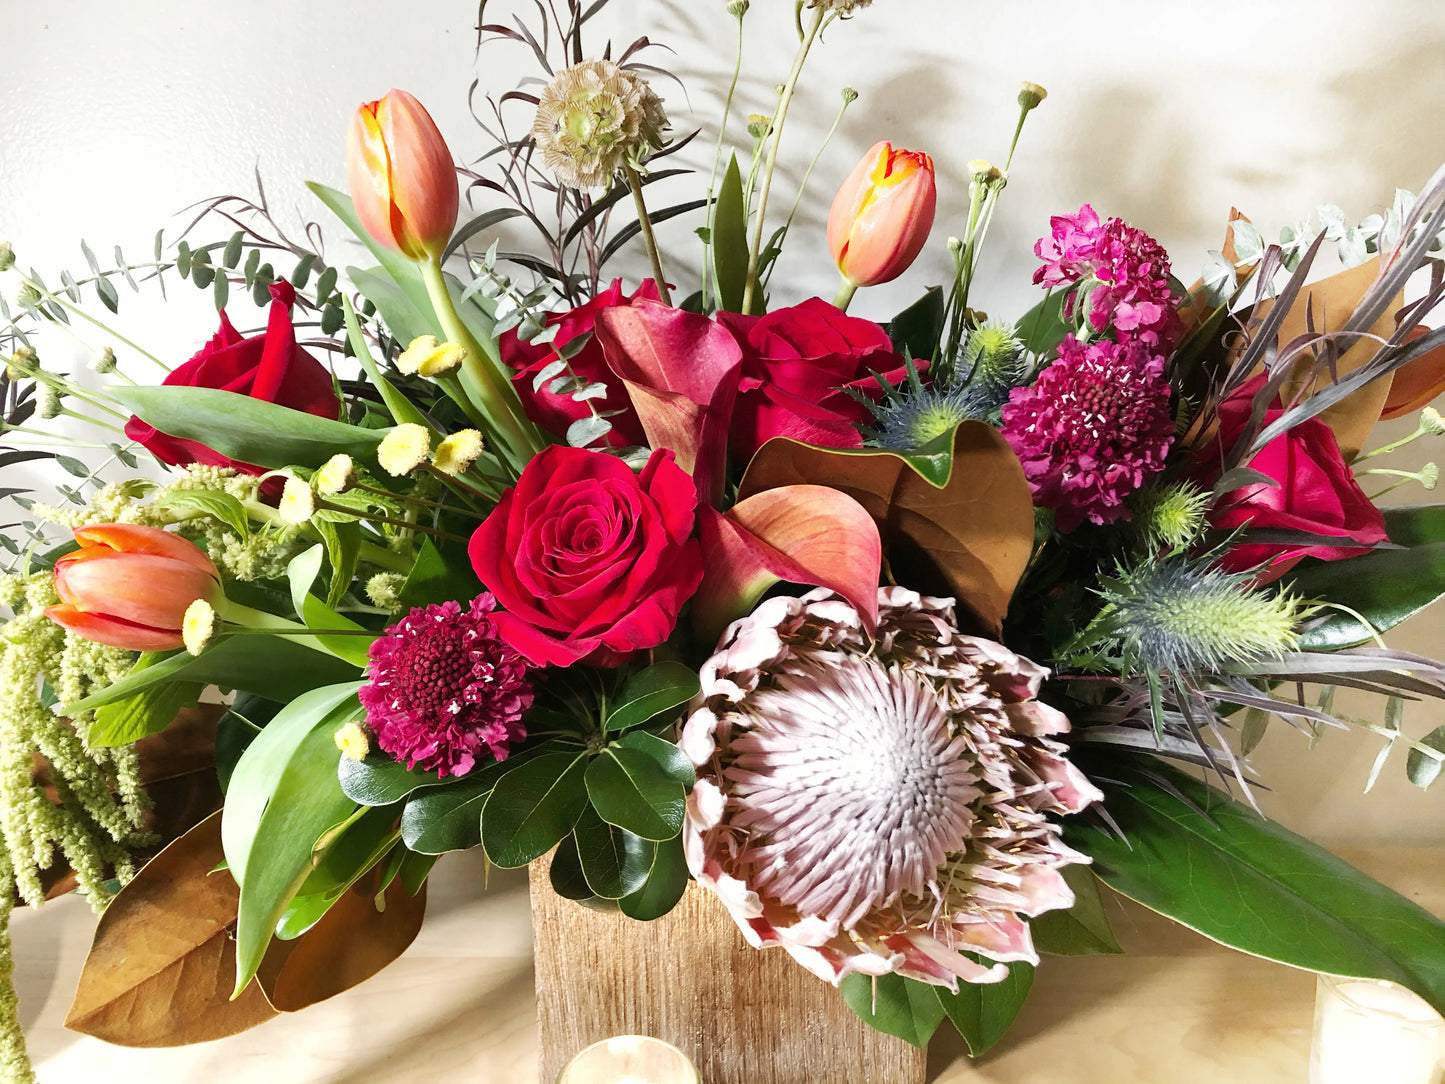 Protea and Roses...Swoon